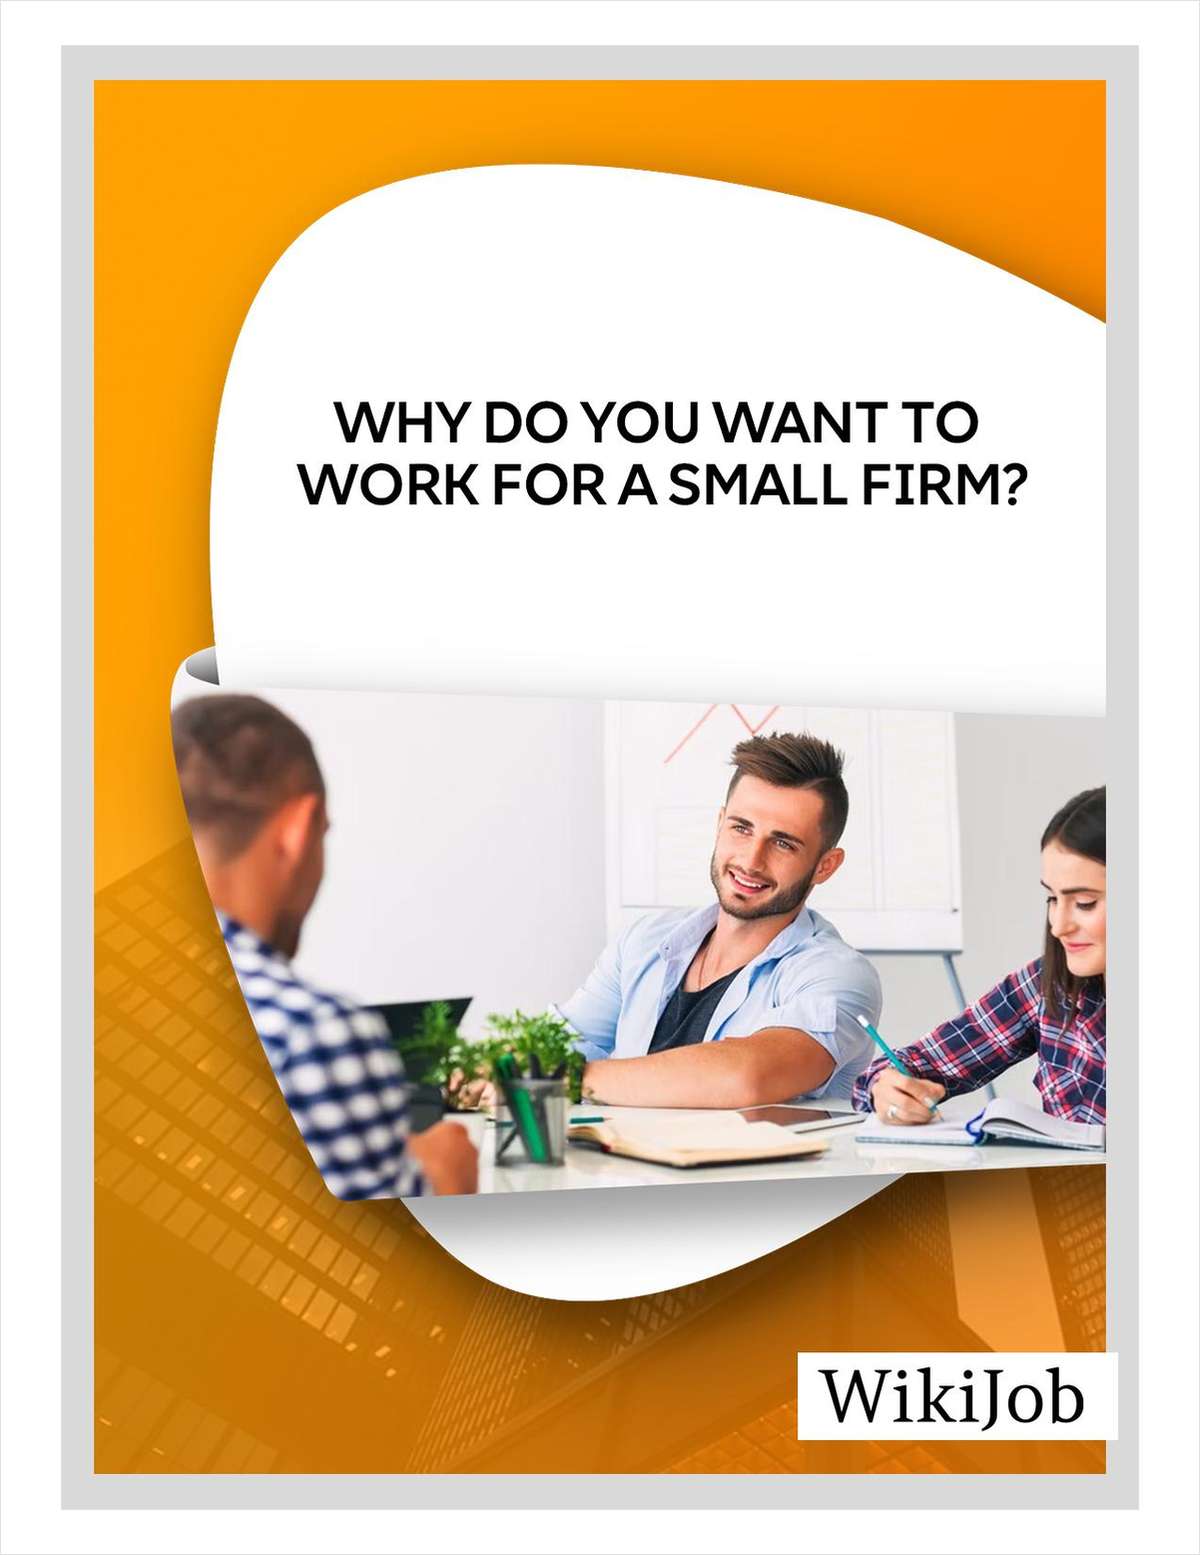 Why Do You Want to Work for a Small Firm?